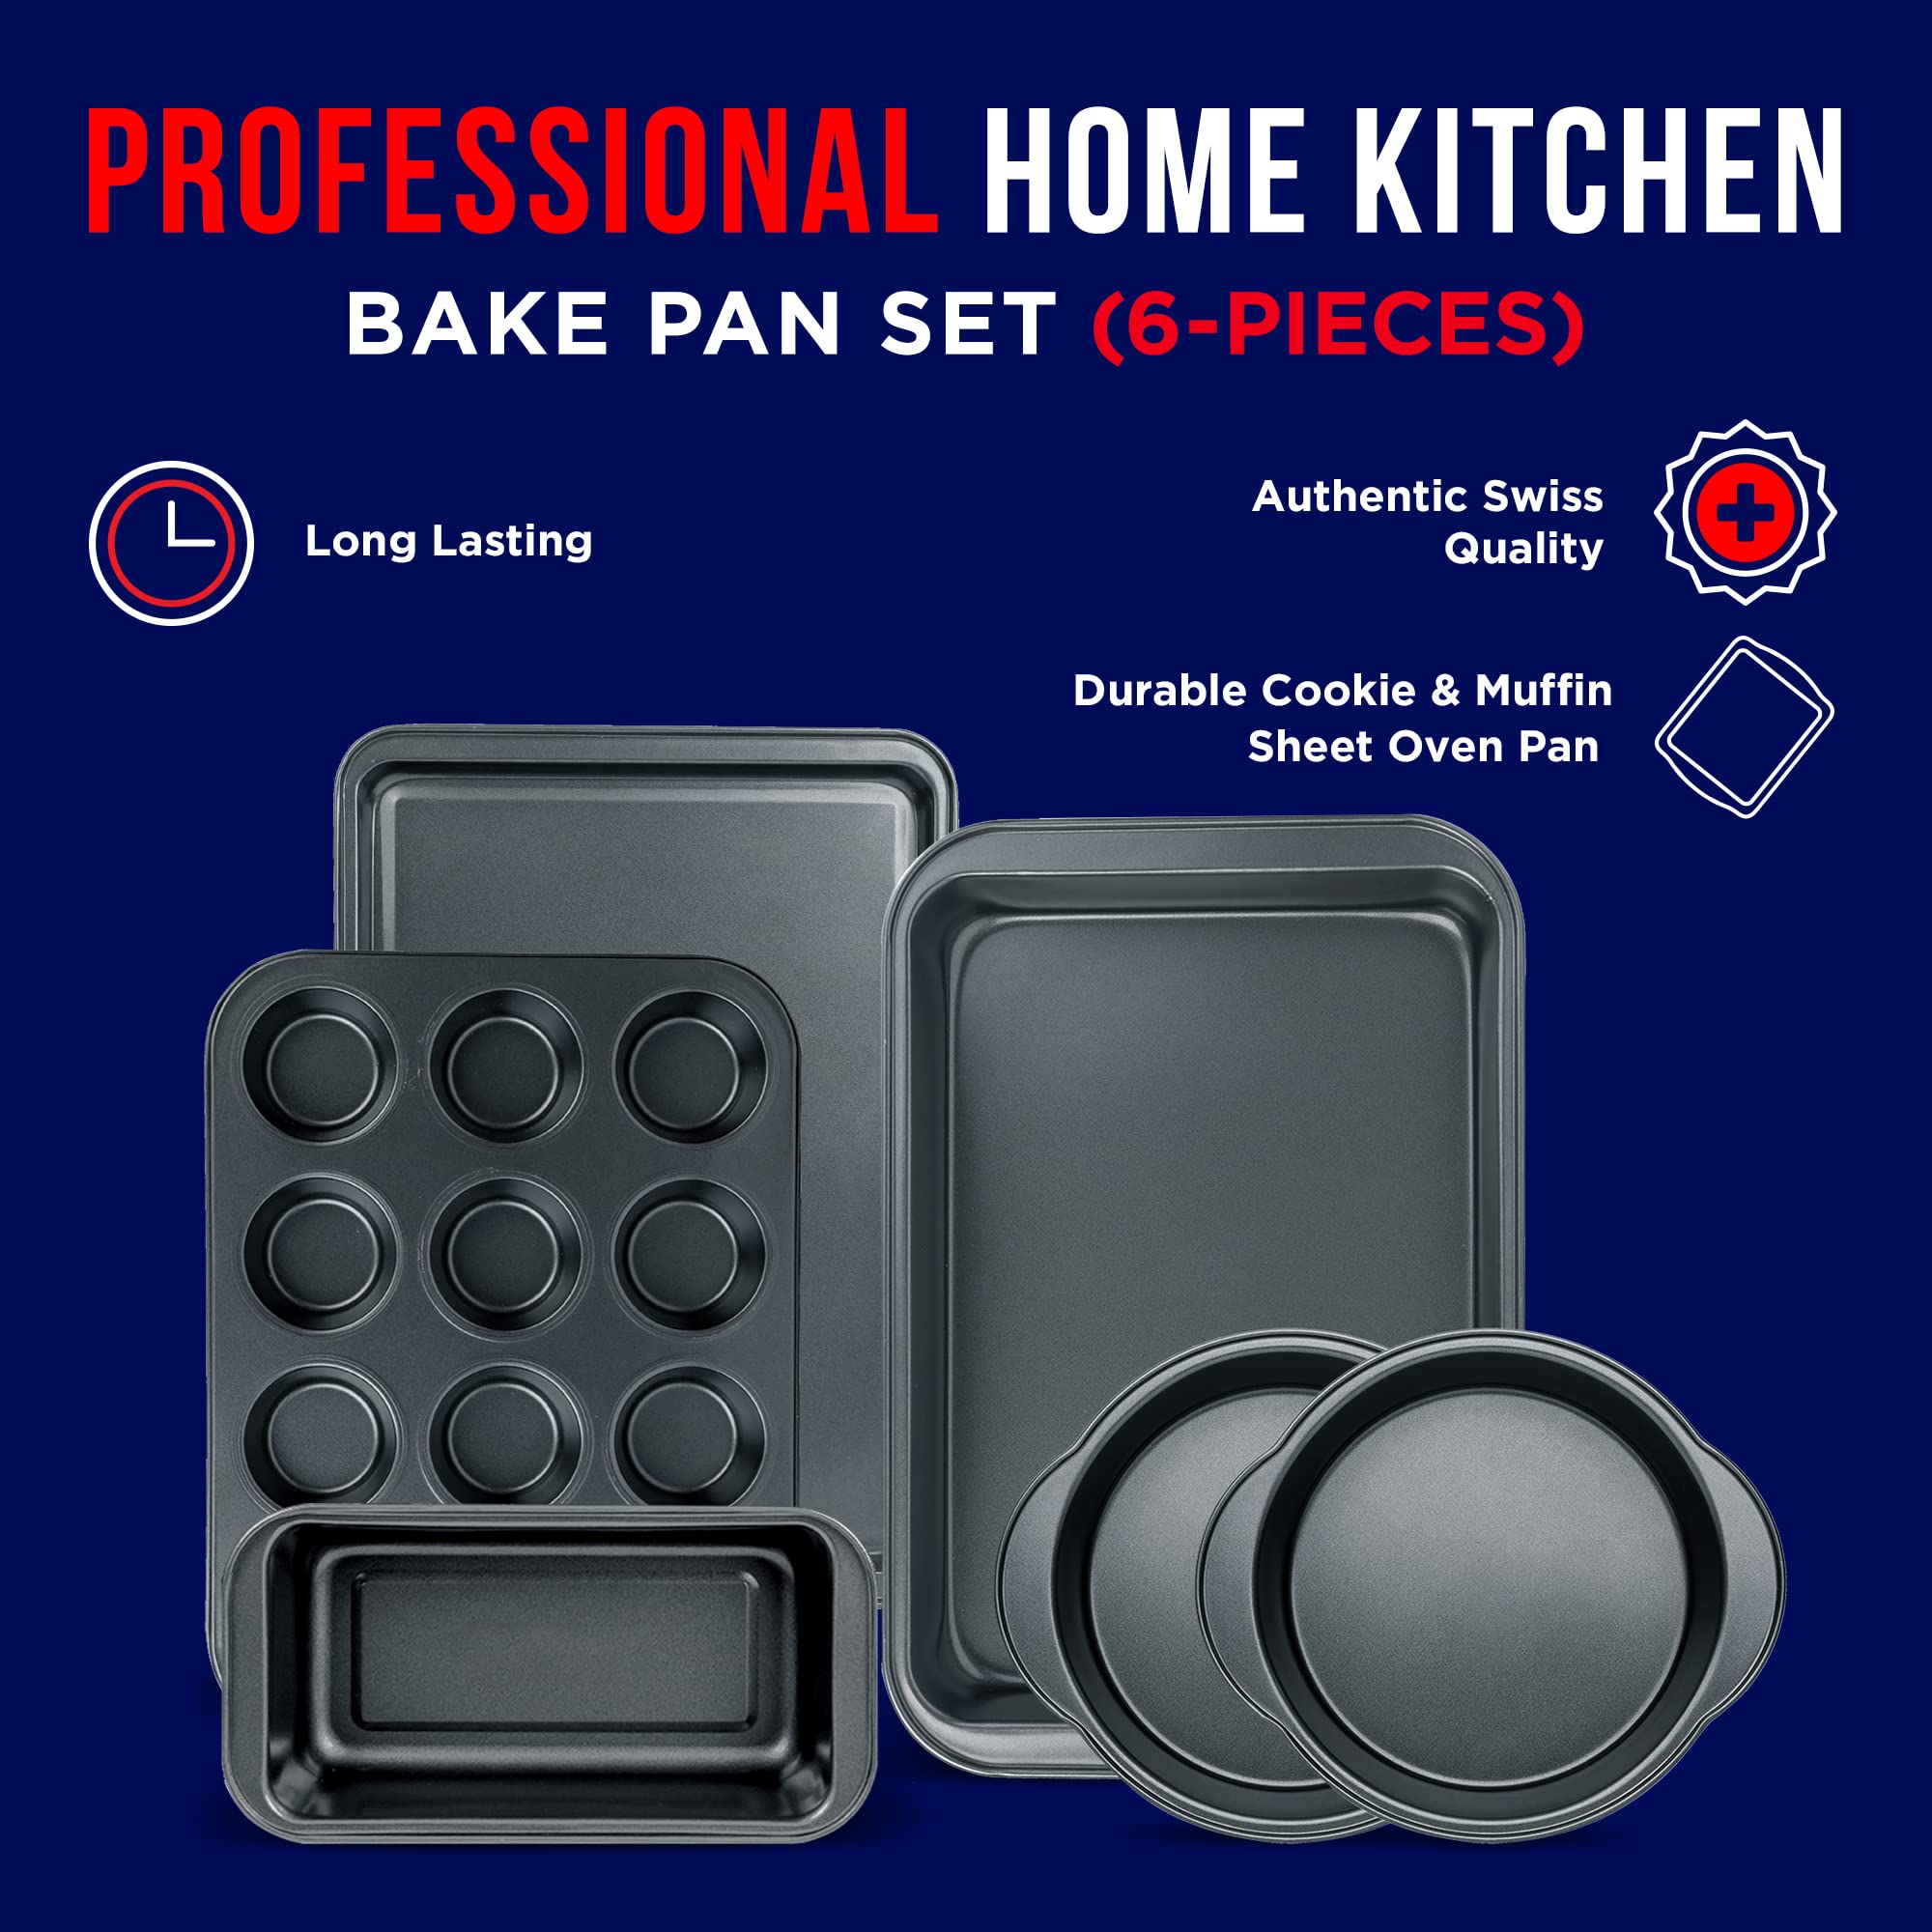 Baking Set – 6 Piece – Deluxe Non Stick Black Coating Inside and Outside – Carbon Steel Bakeware Set – PFOA PFOS and PTFE Free by Bakken